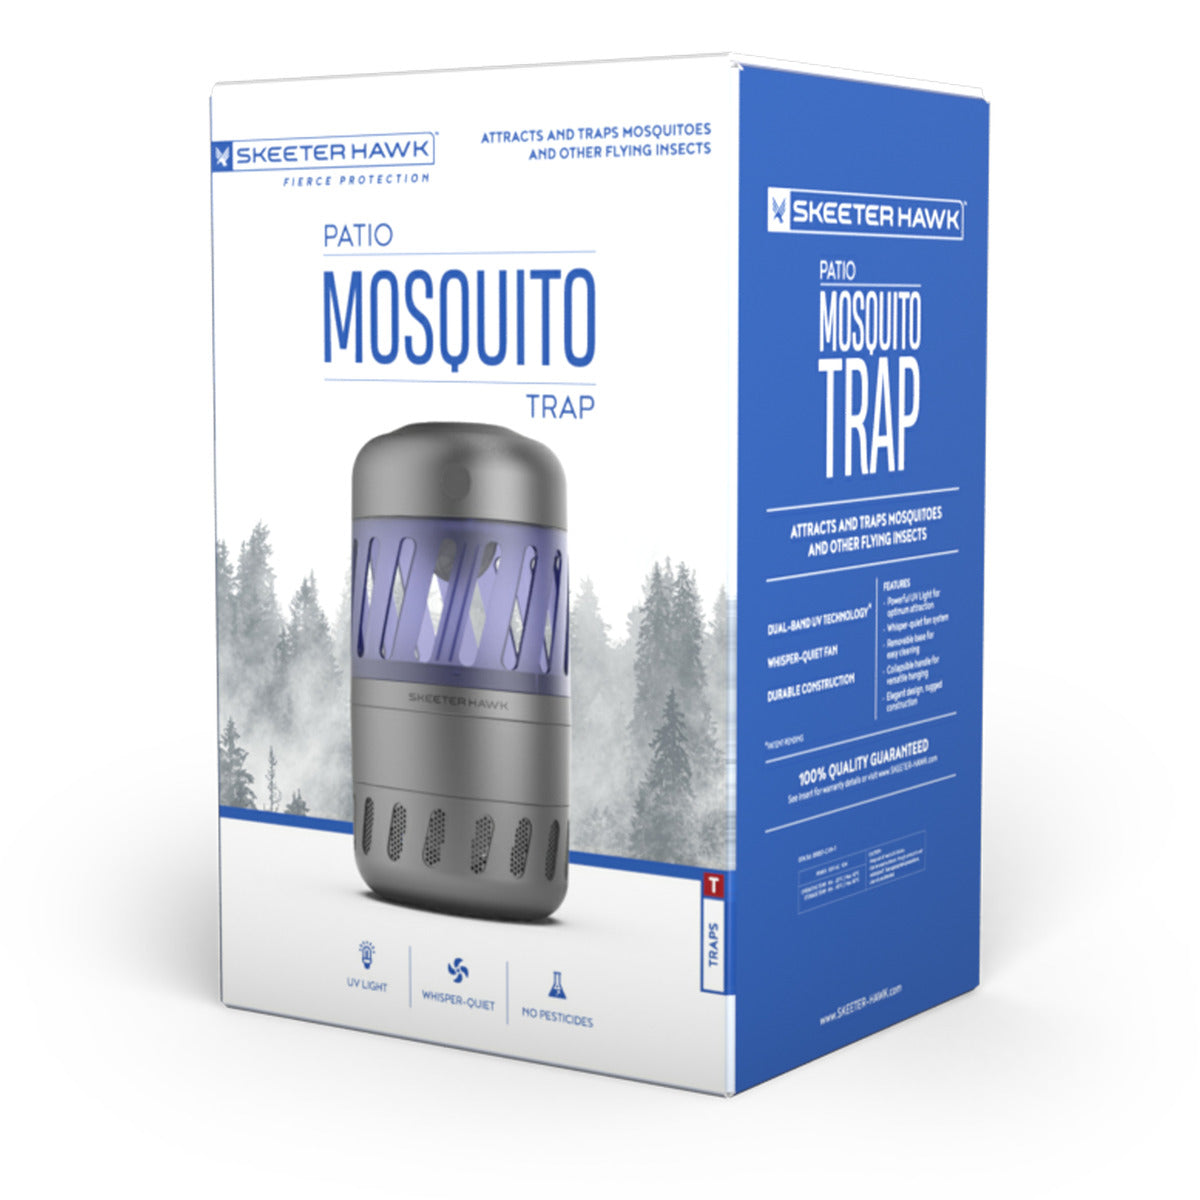 NEBO Skeeter Hawk Patio Mosquito Trap - KBM Outdoors